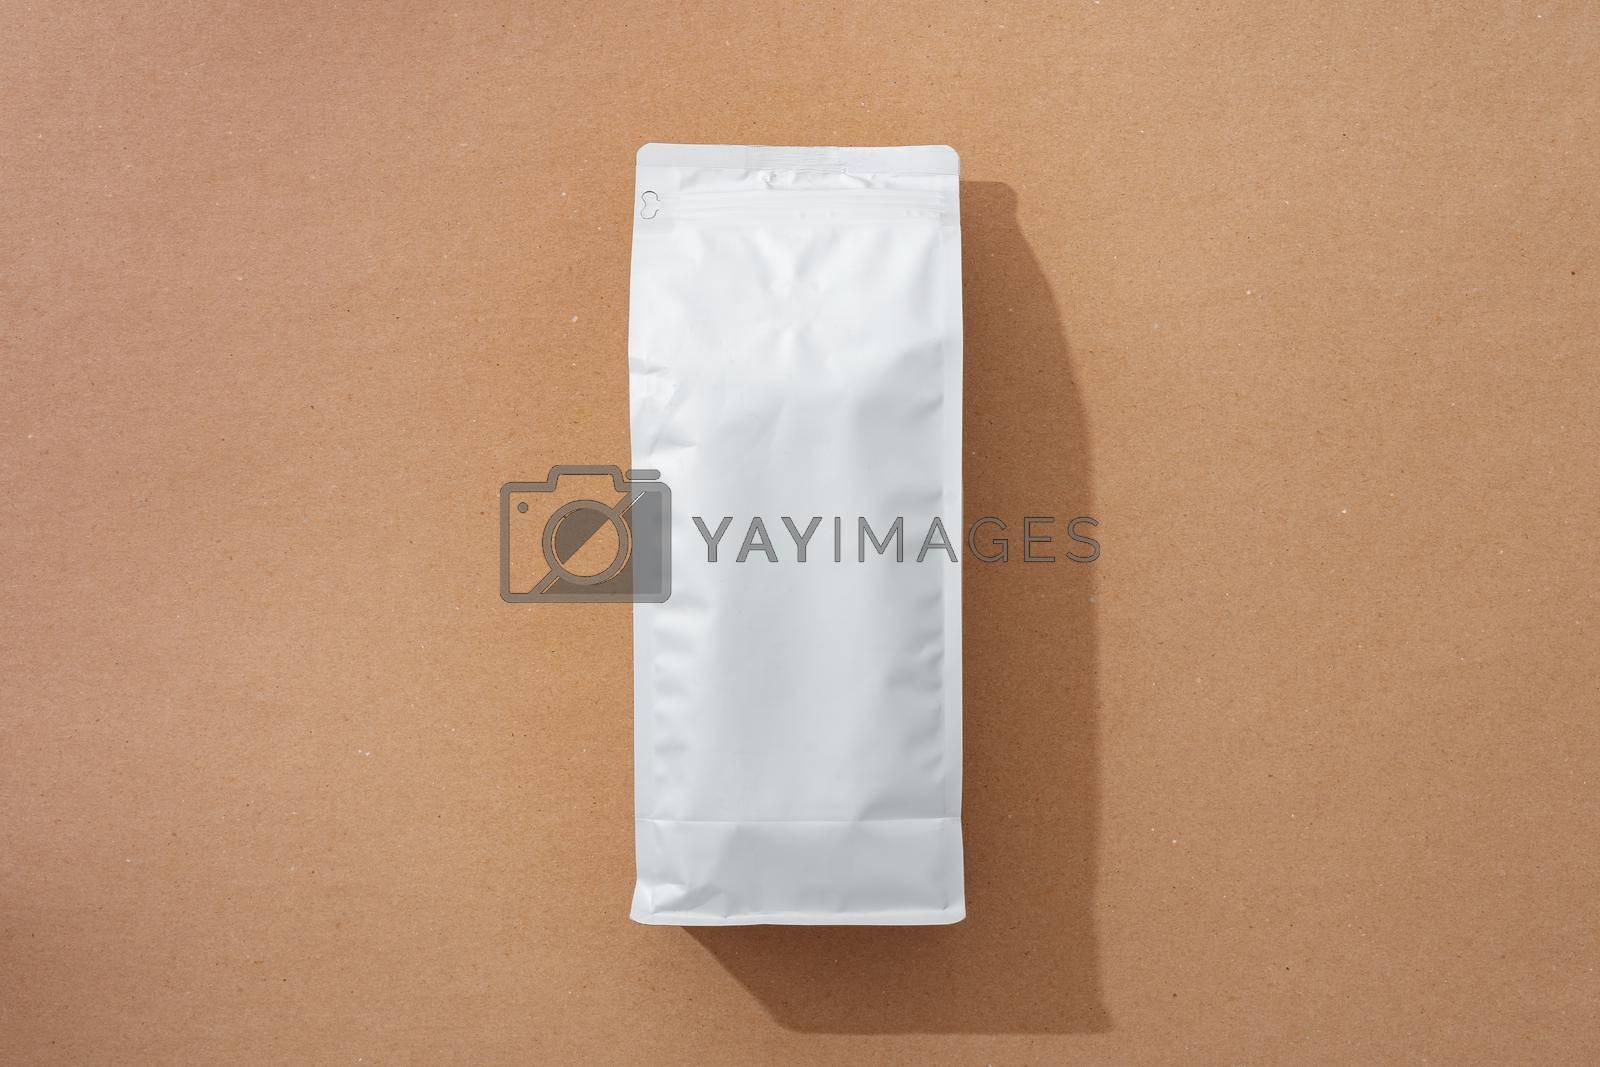 Royalty free image of White blank matte coffee package on paper background by Fabrikasimf